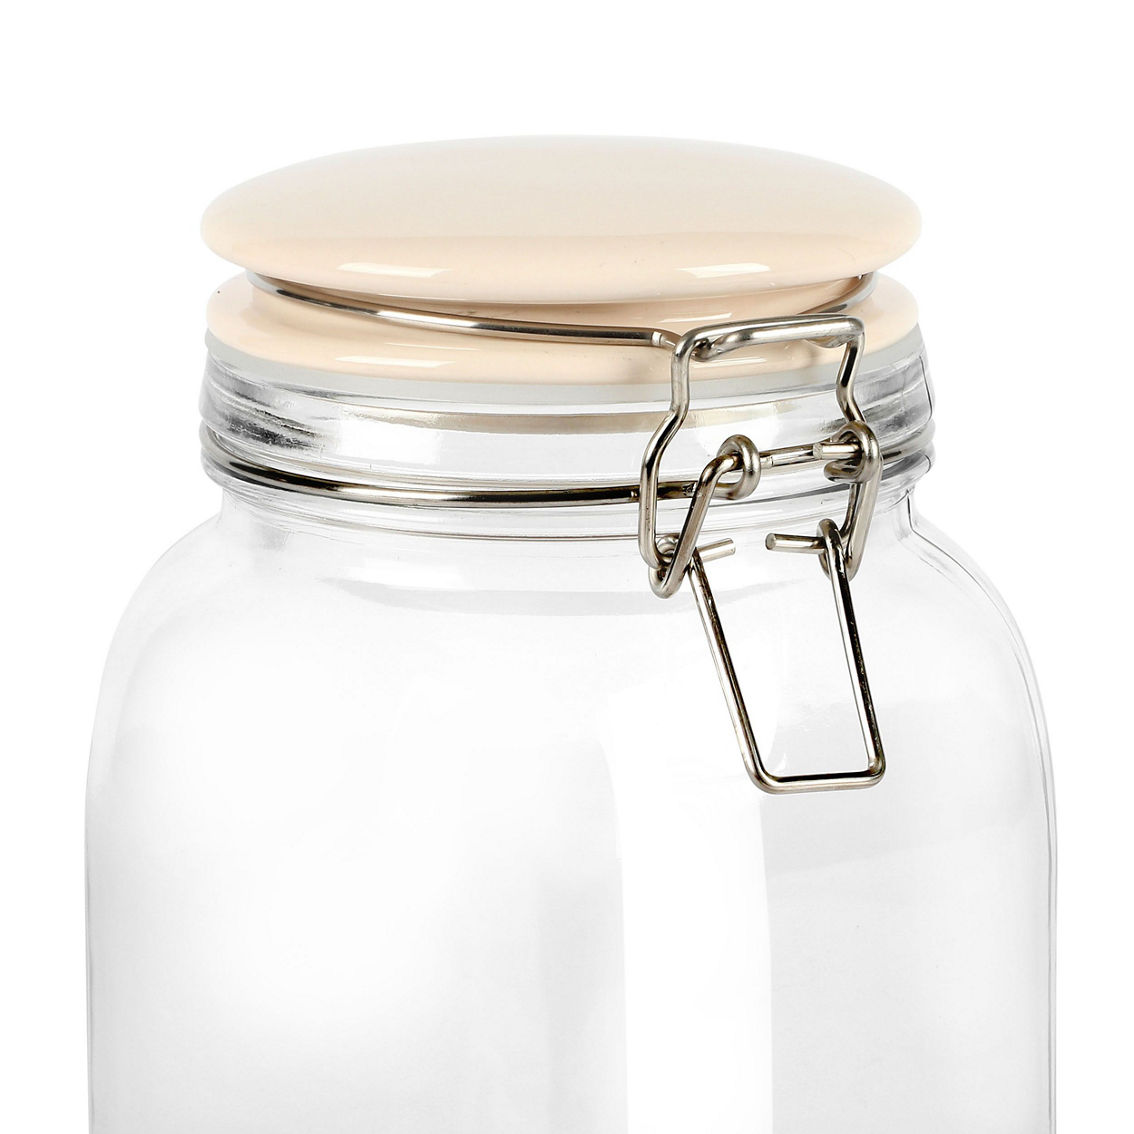 Martha Stewart Rindleton 3 Piece Glass Canister Set with Ceramic Lids in Off-Whi - Image 5 of 5